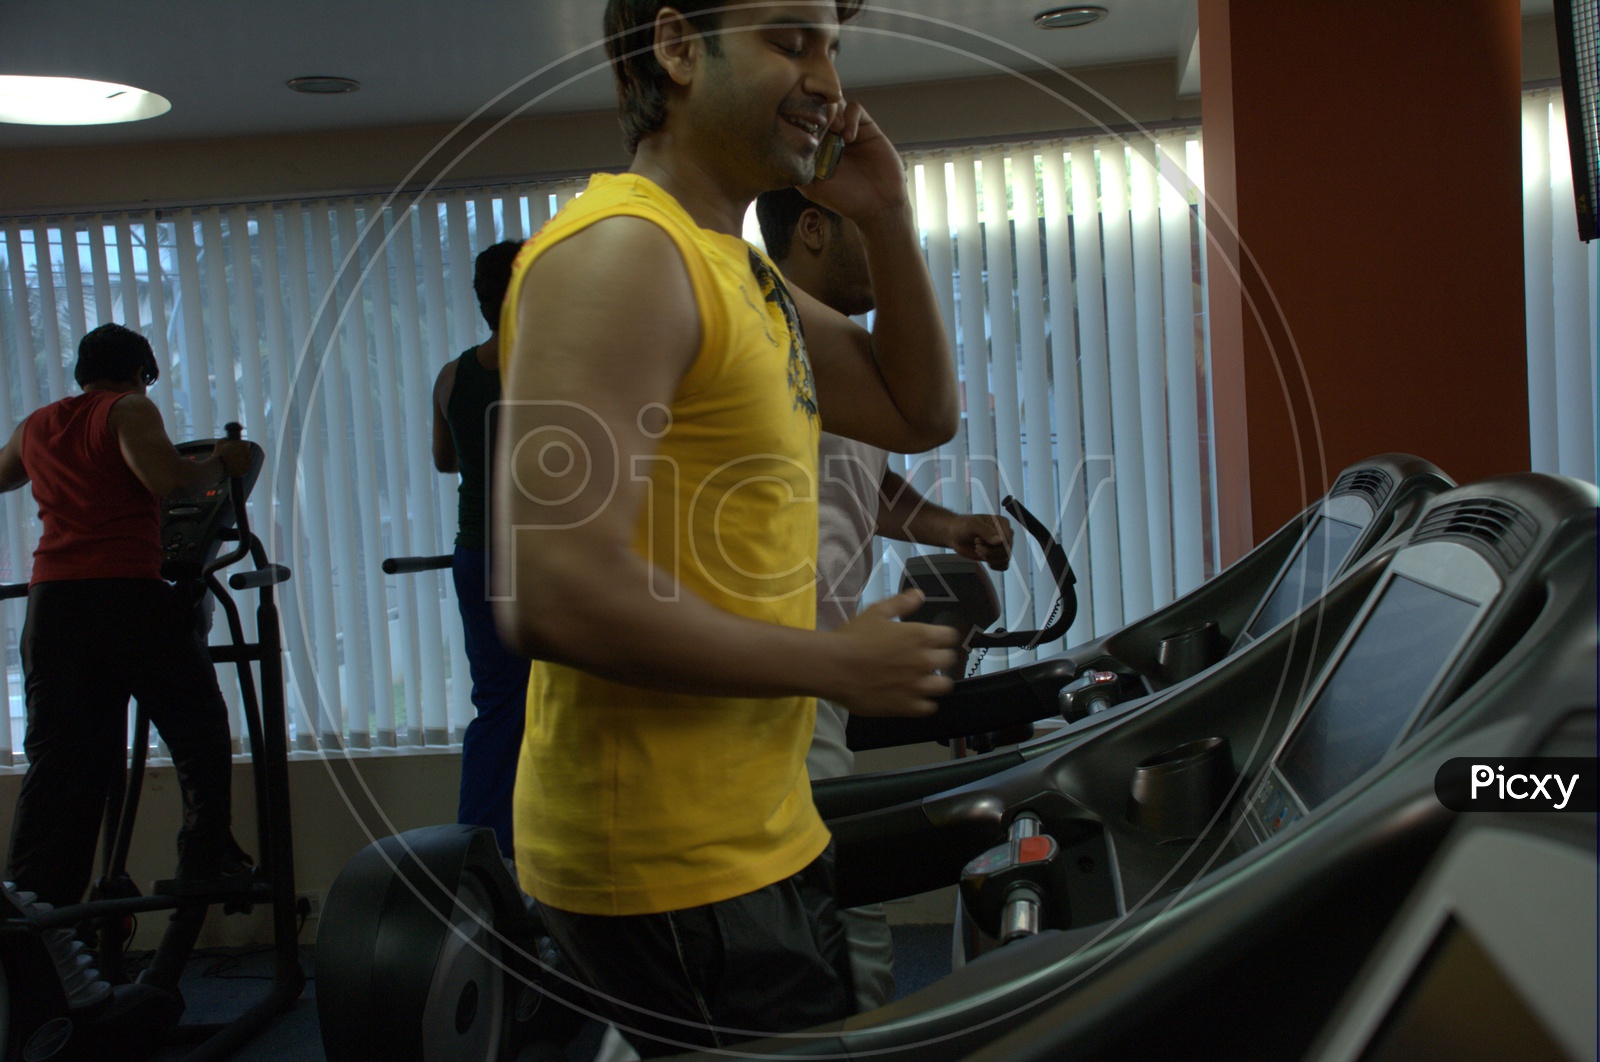 Actor Sumanth in a Gym